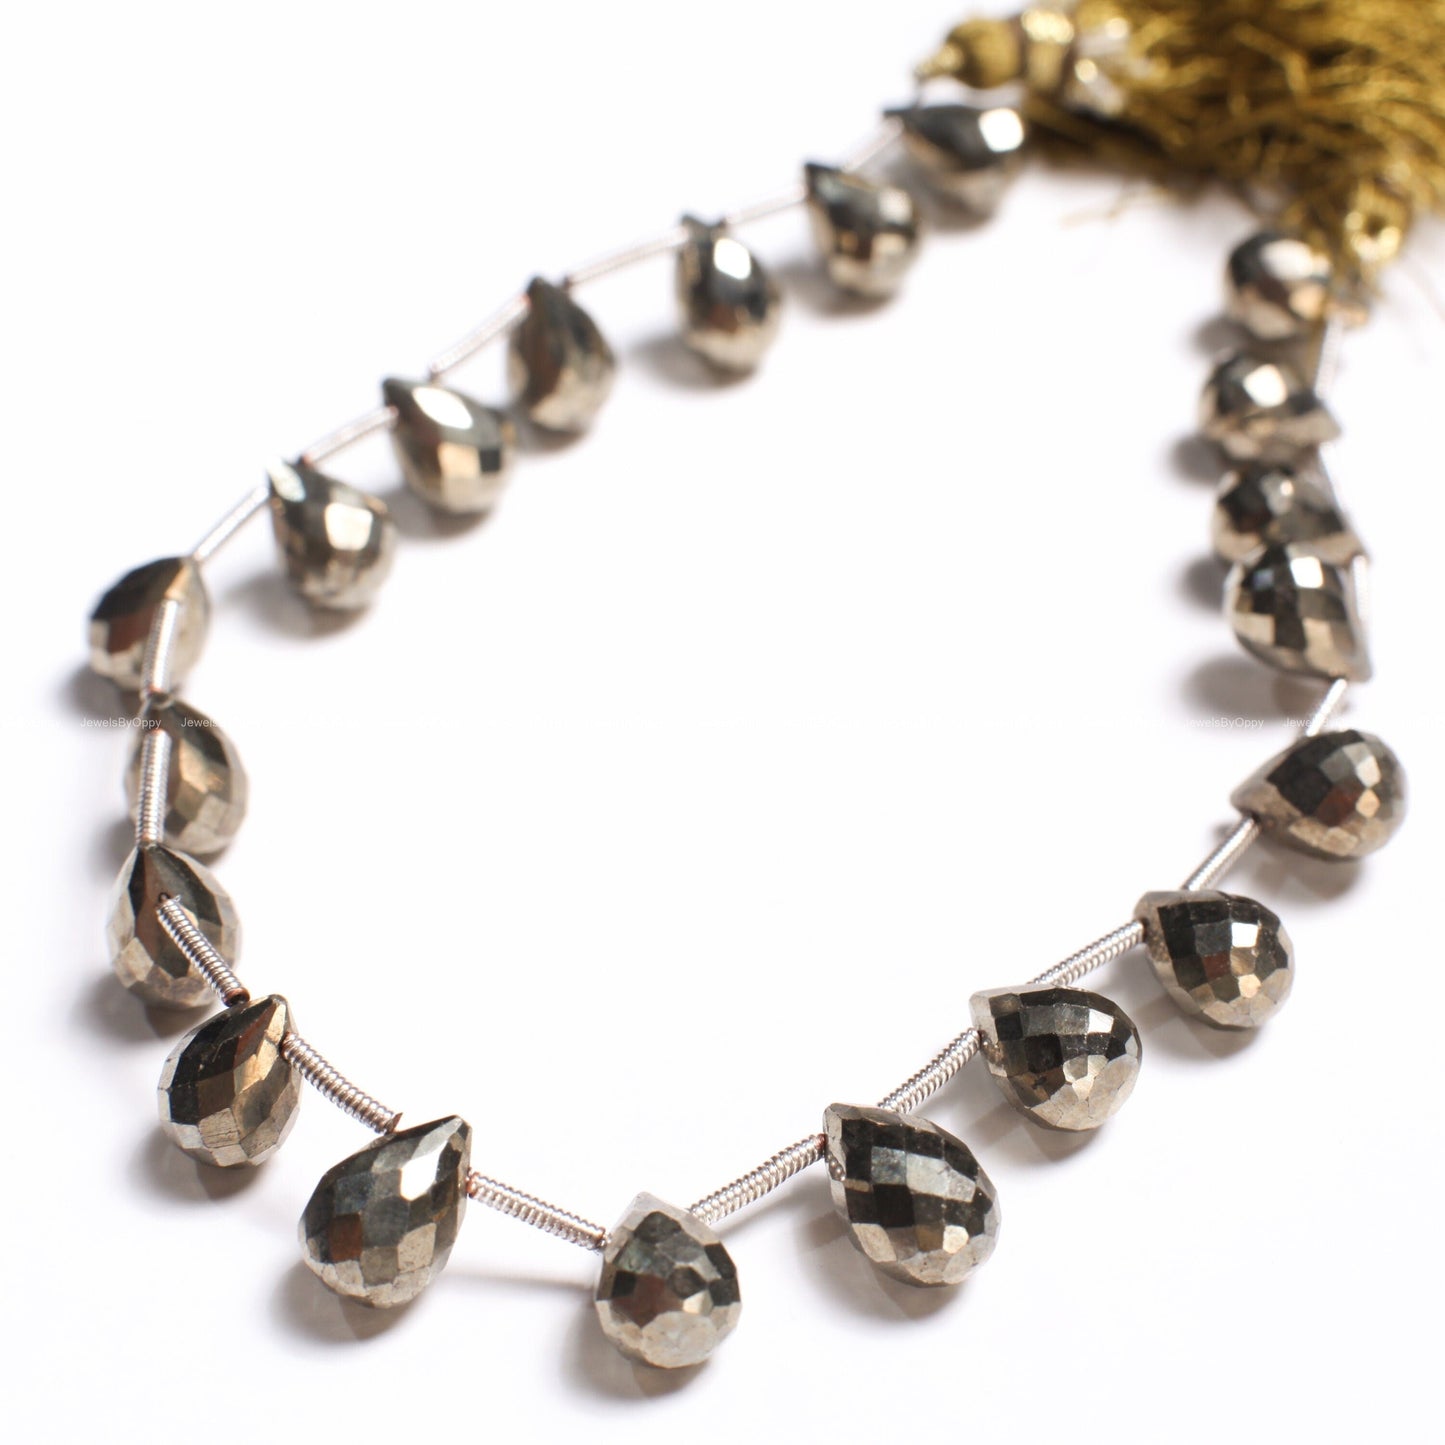 Pyrite Faceted Briolette 6x9mm Teardrop, Jewelry Making Beads 1 strand 20 Pcs, super sparkly, heavy weight.